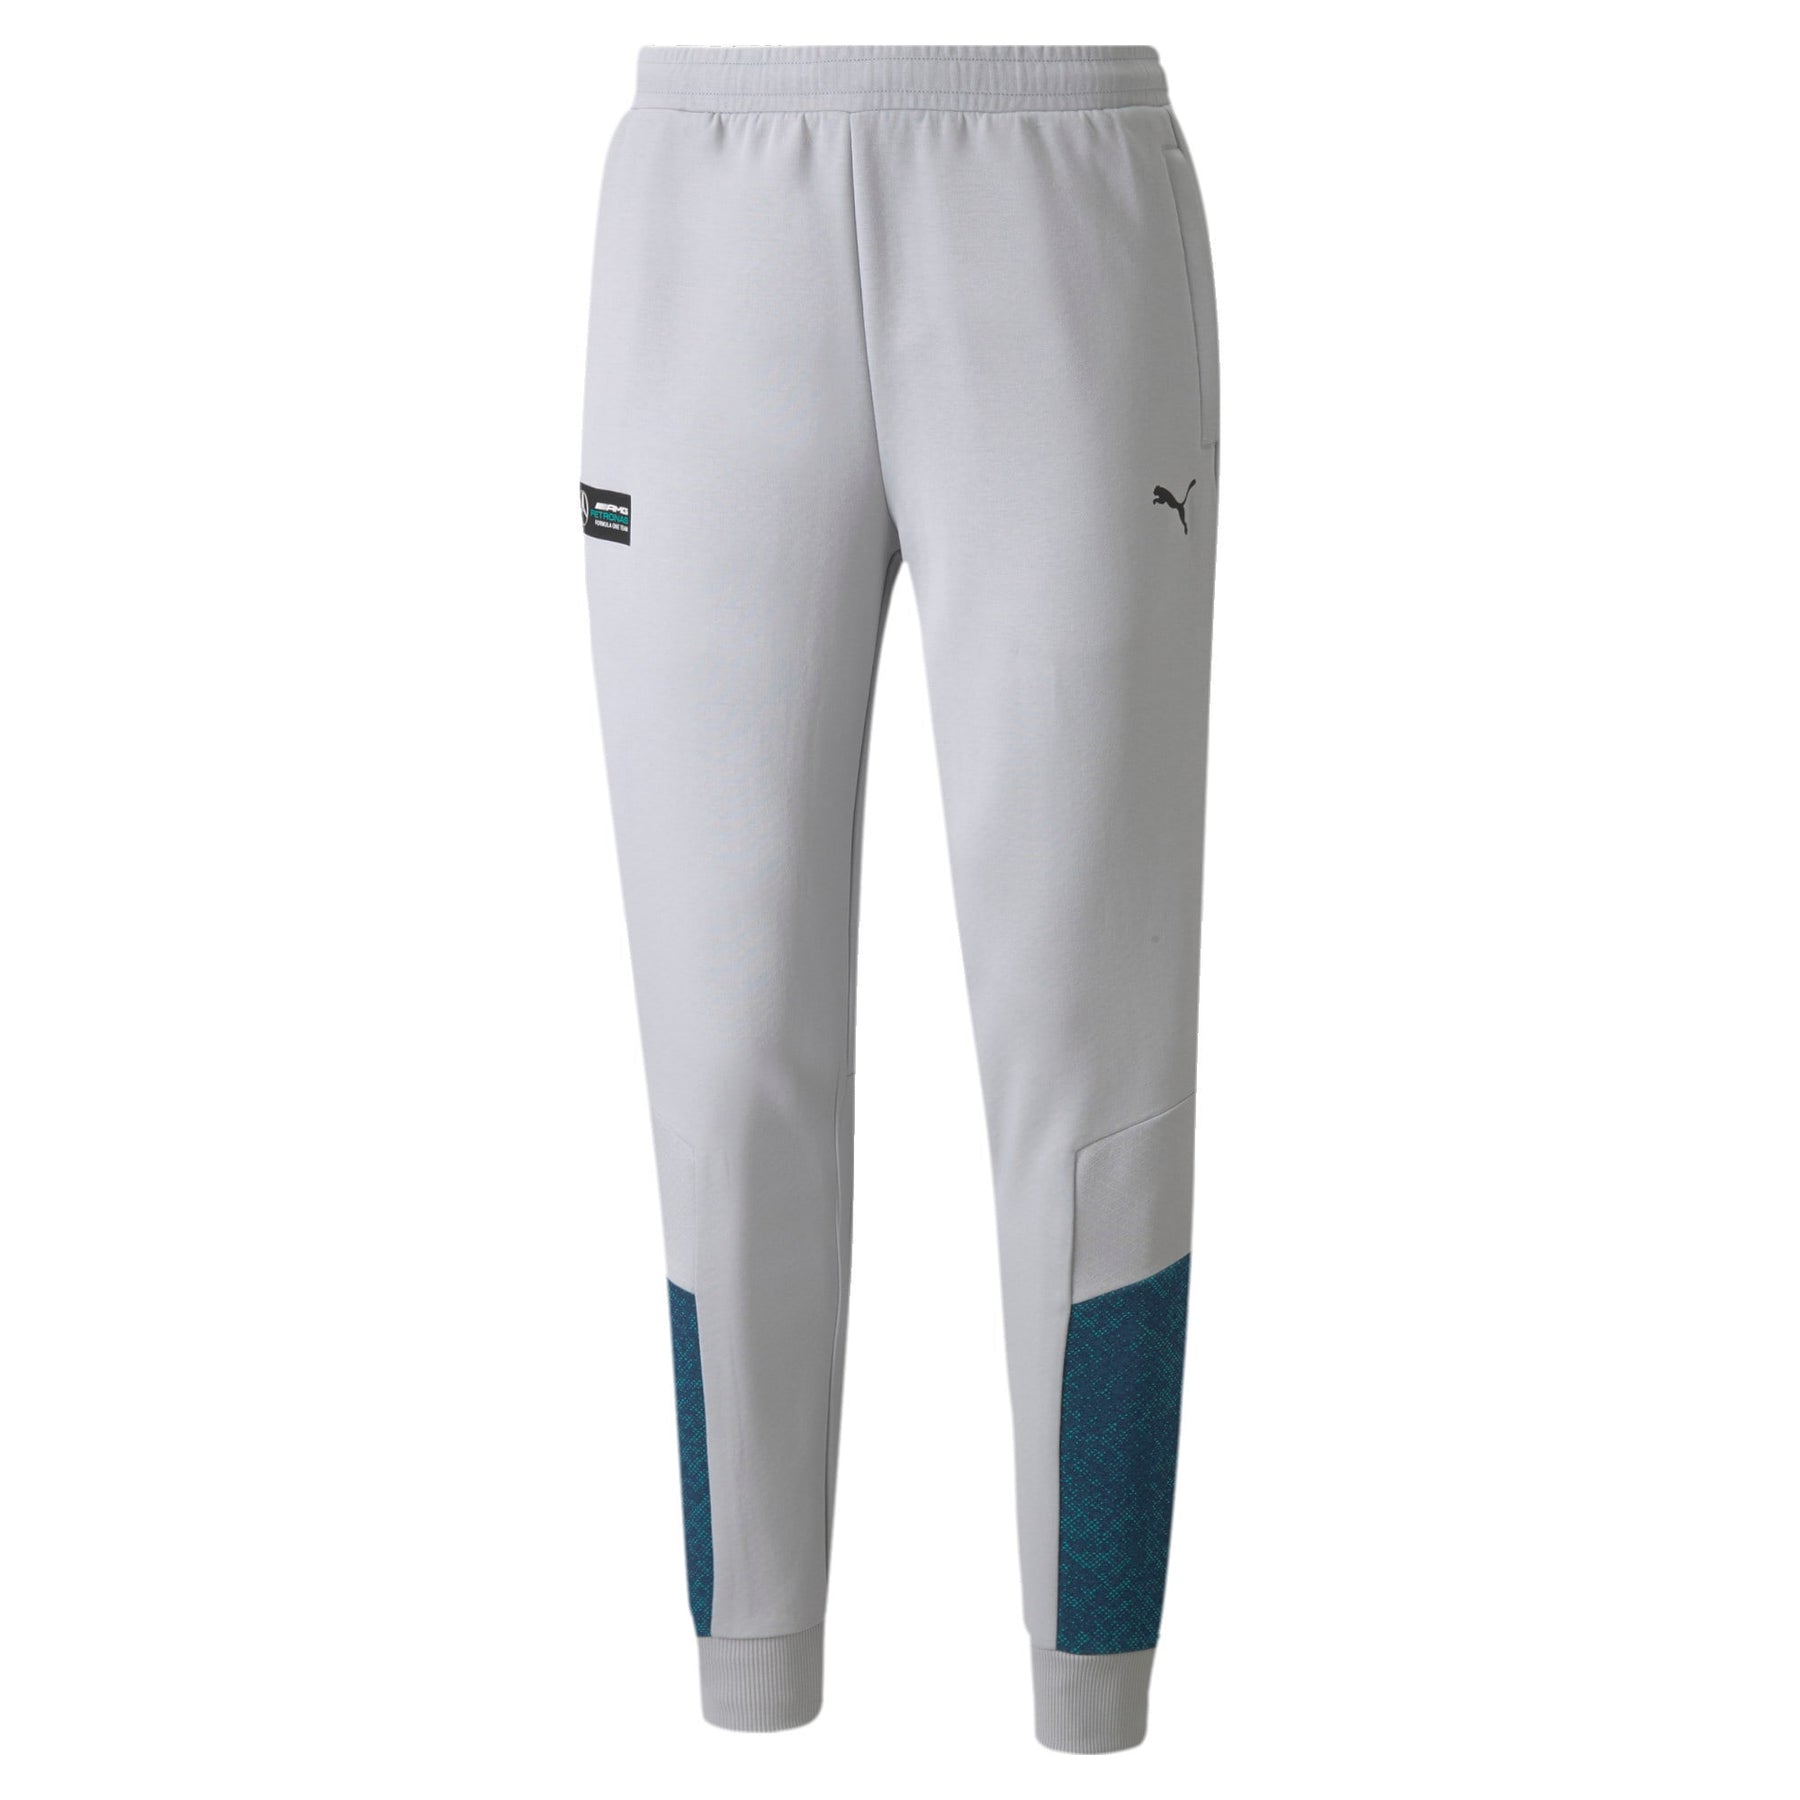 PUMA Trousers & Lowers for Men sale - discounted price | FASHIOLA INDIA